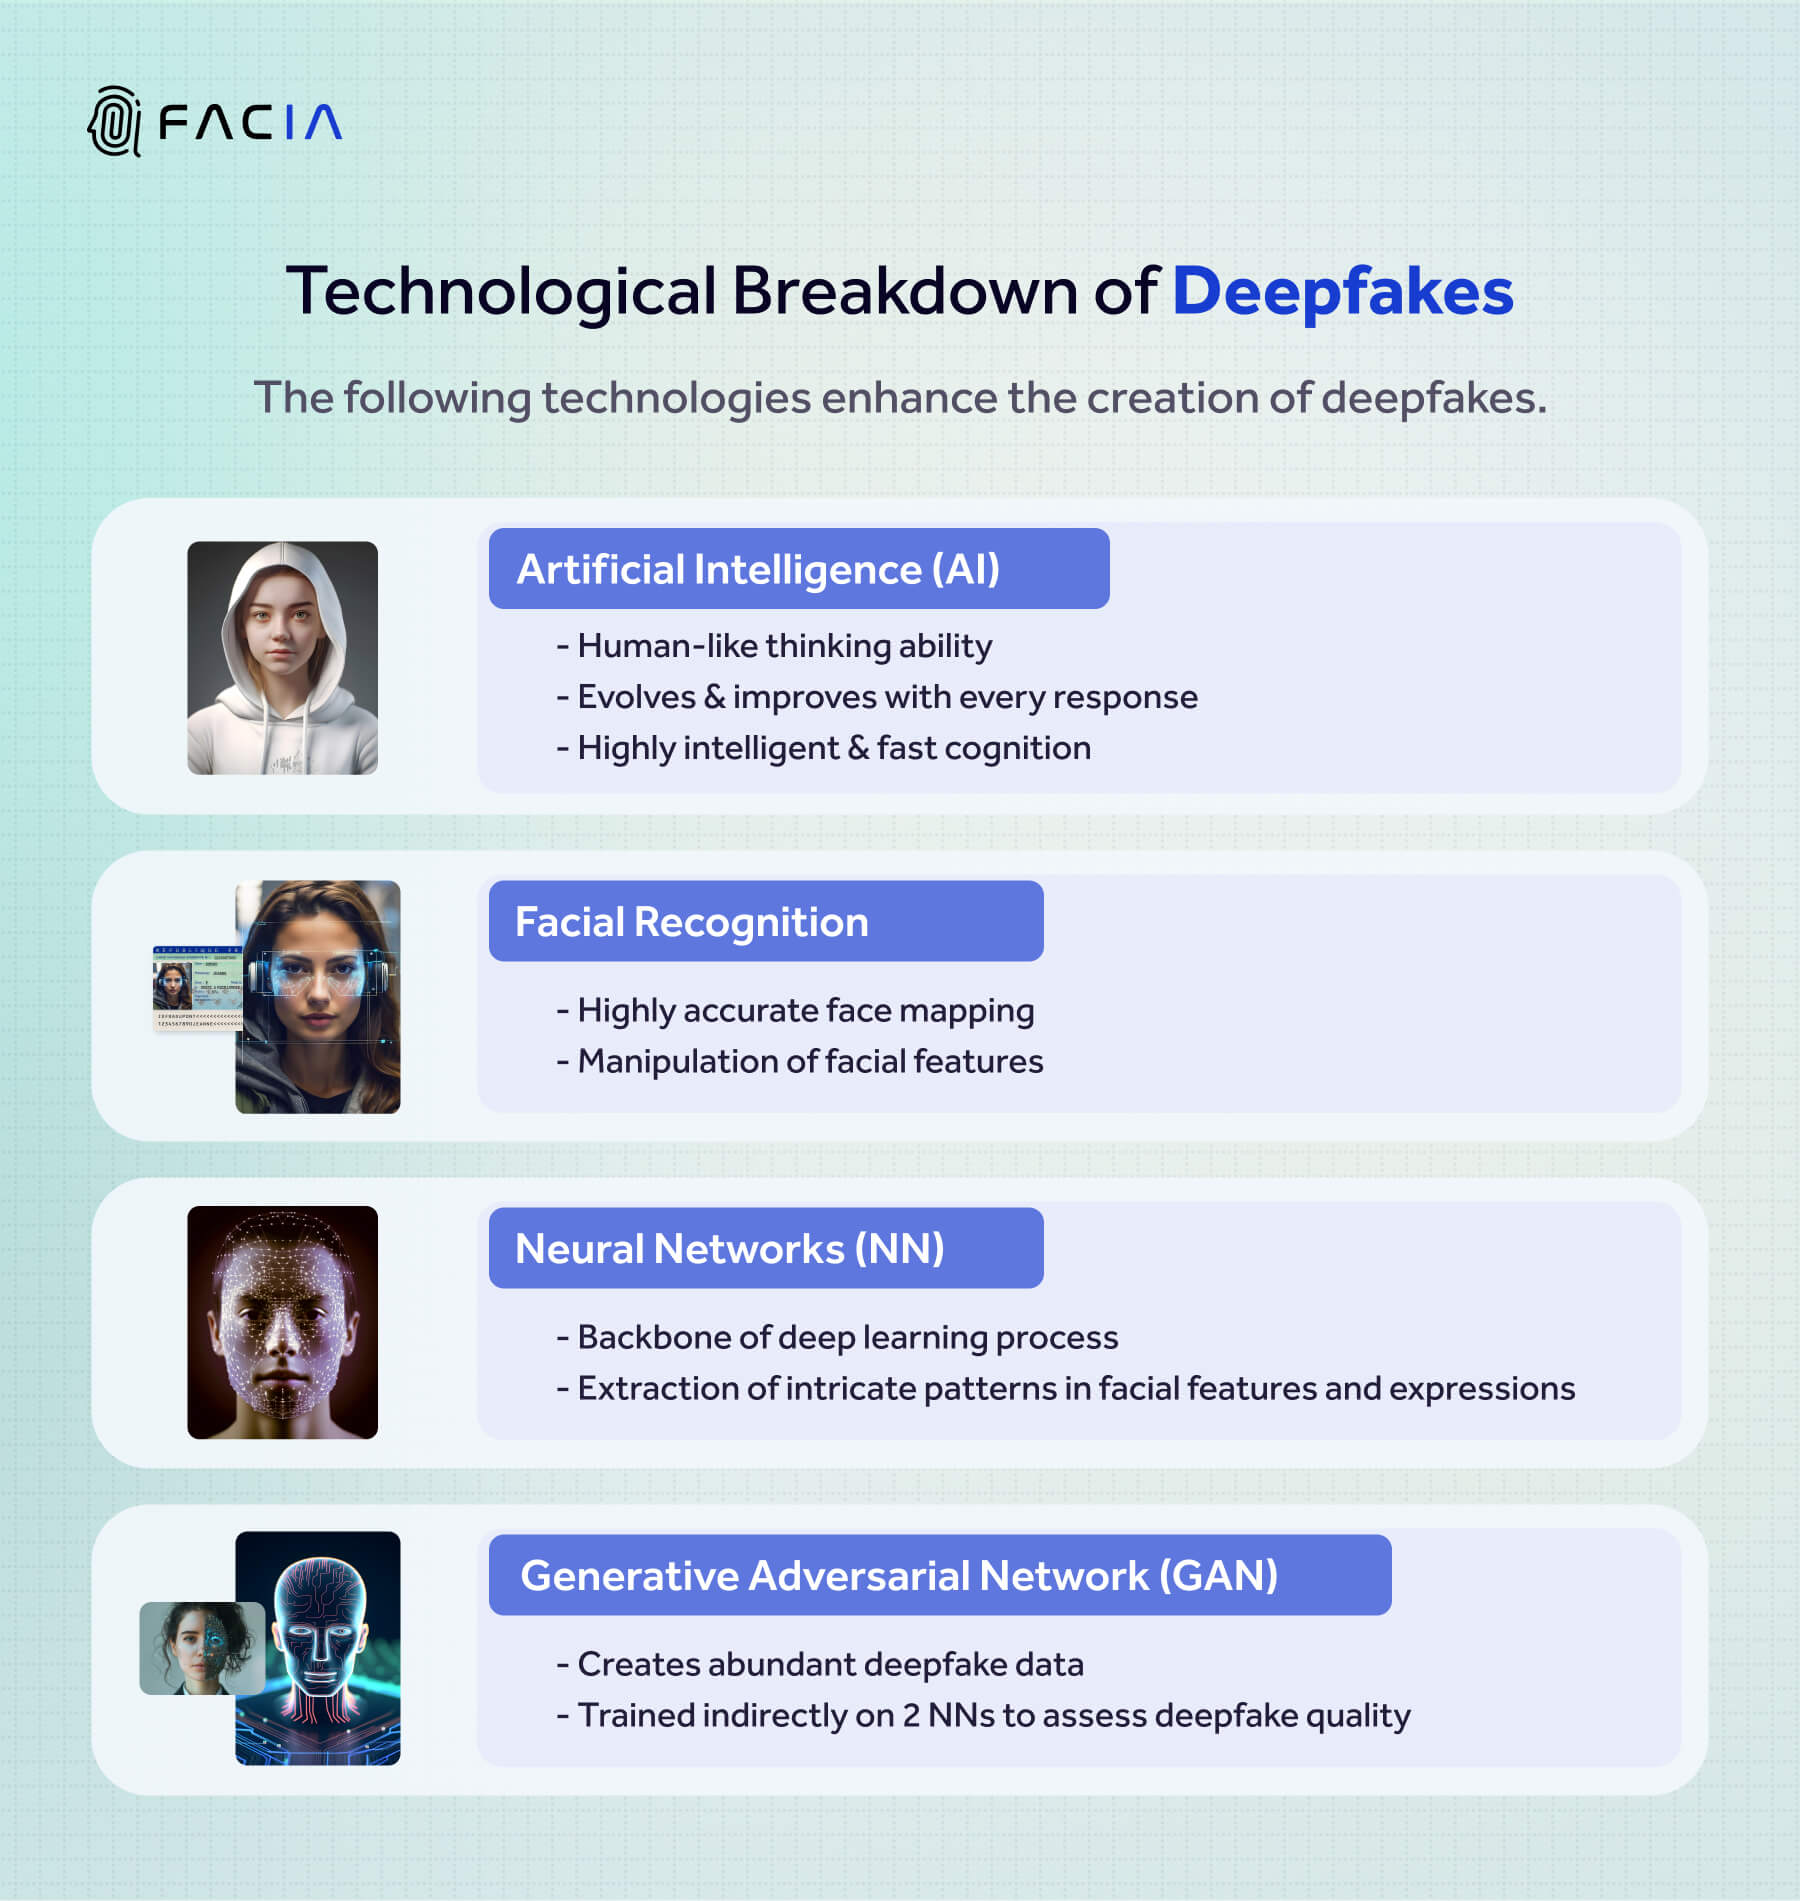 This Infographic shows the technological breakdown of deepfakes. It explains the major technologies involved in creating facial deepfakes